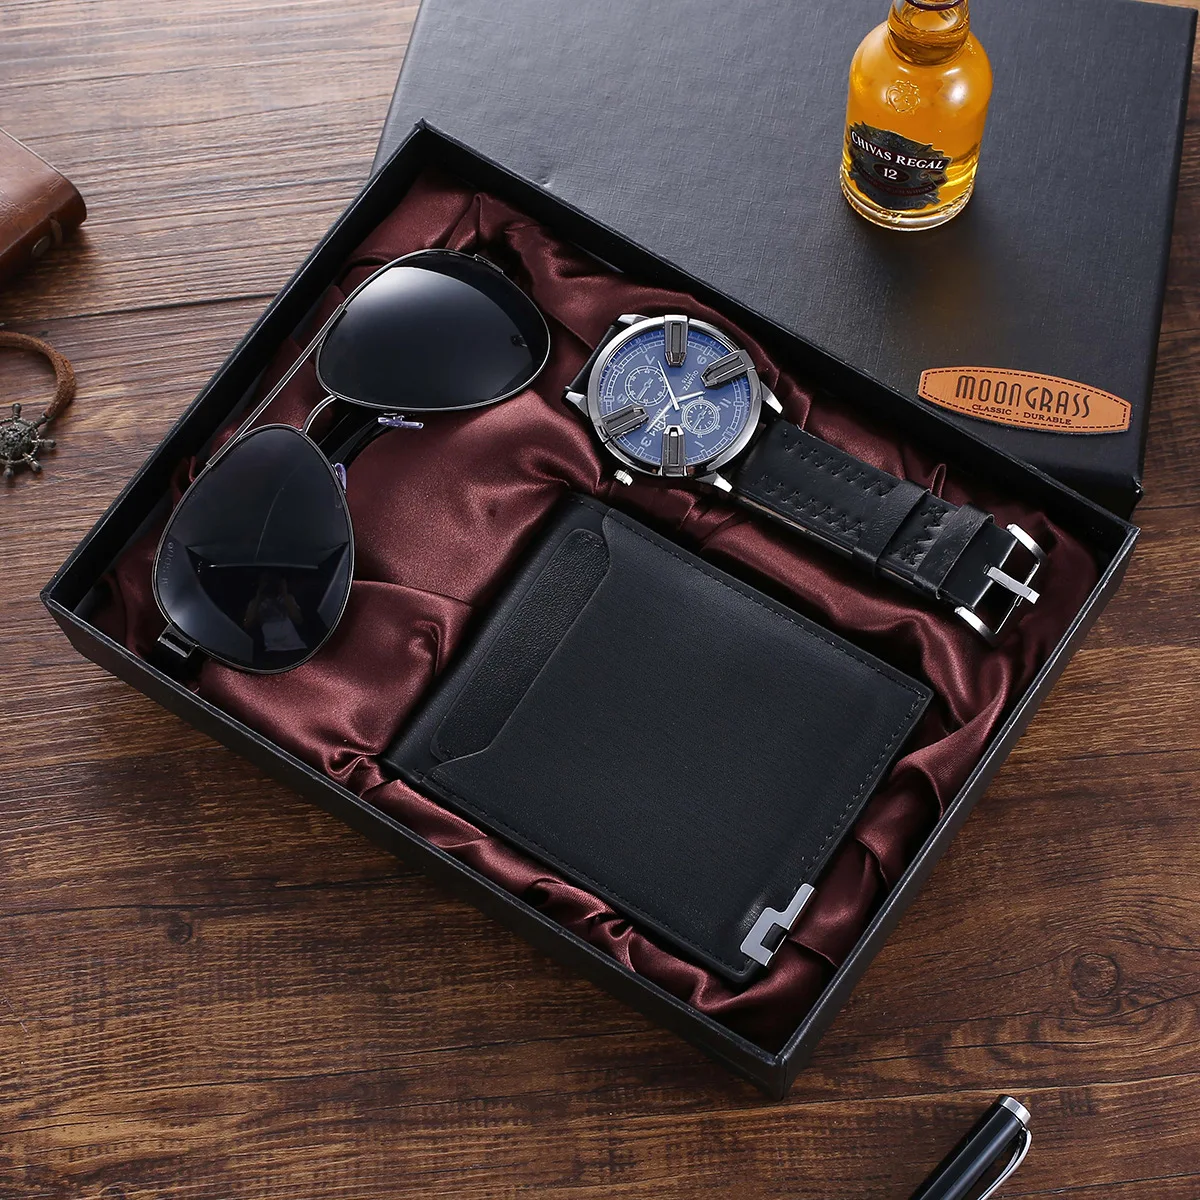 LORENZ Analogue Gift Set Combo Box Of Men's Watch, Wallet & Sunglasses  (Black Dial Black Colored Strap) : Amazon.in: Bags, Wallets and Luggage